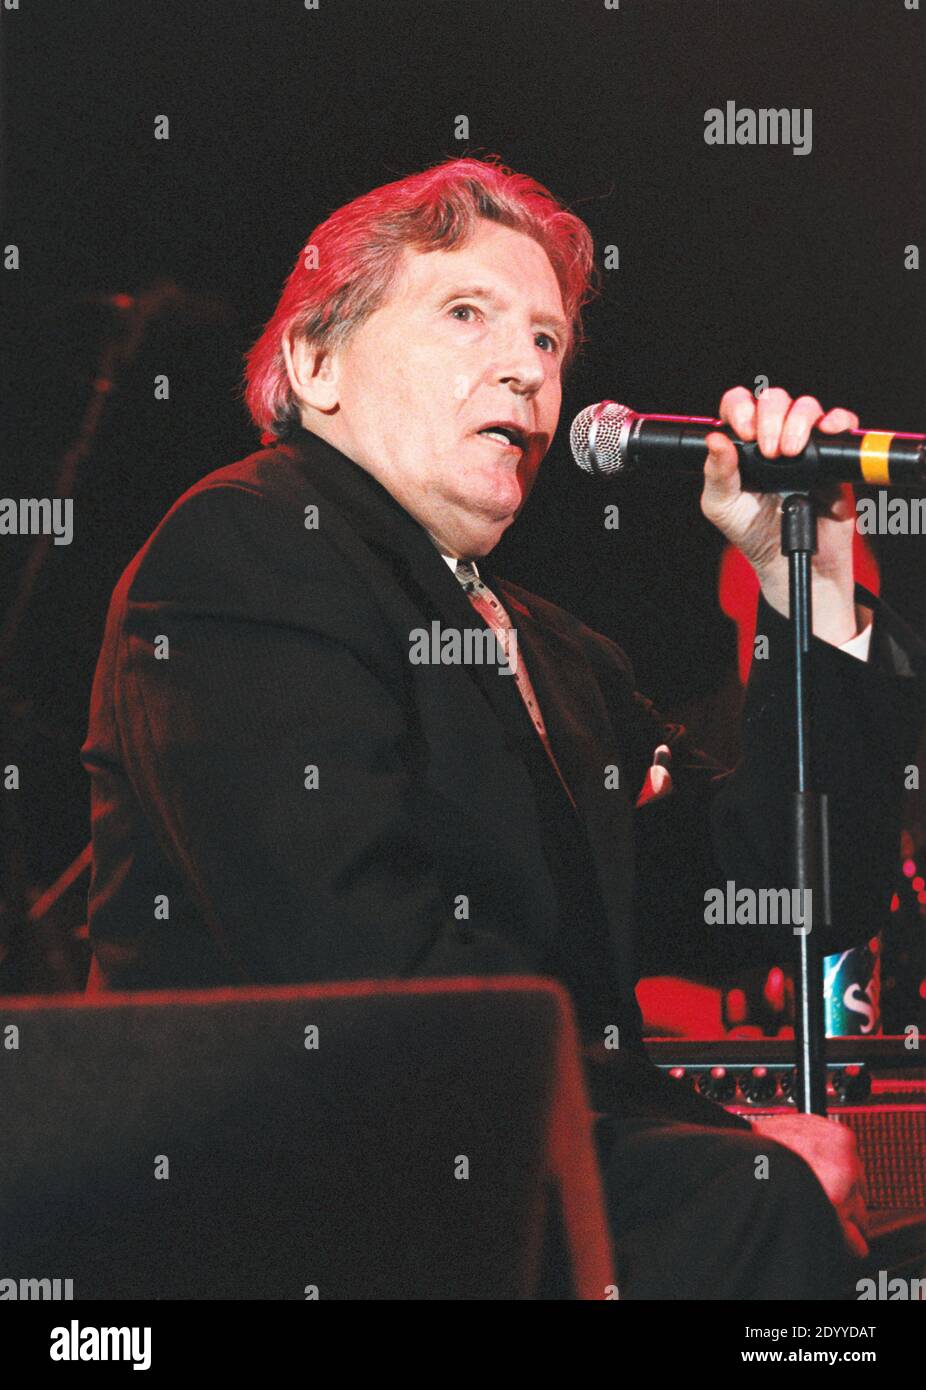 Jerry Lee Lewis in concert at The Rock N Roll Legends Concert at London  Docklands Arena, London, UK. Tuesday 11th July 2000 Stock Photo - Alamy